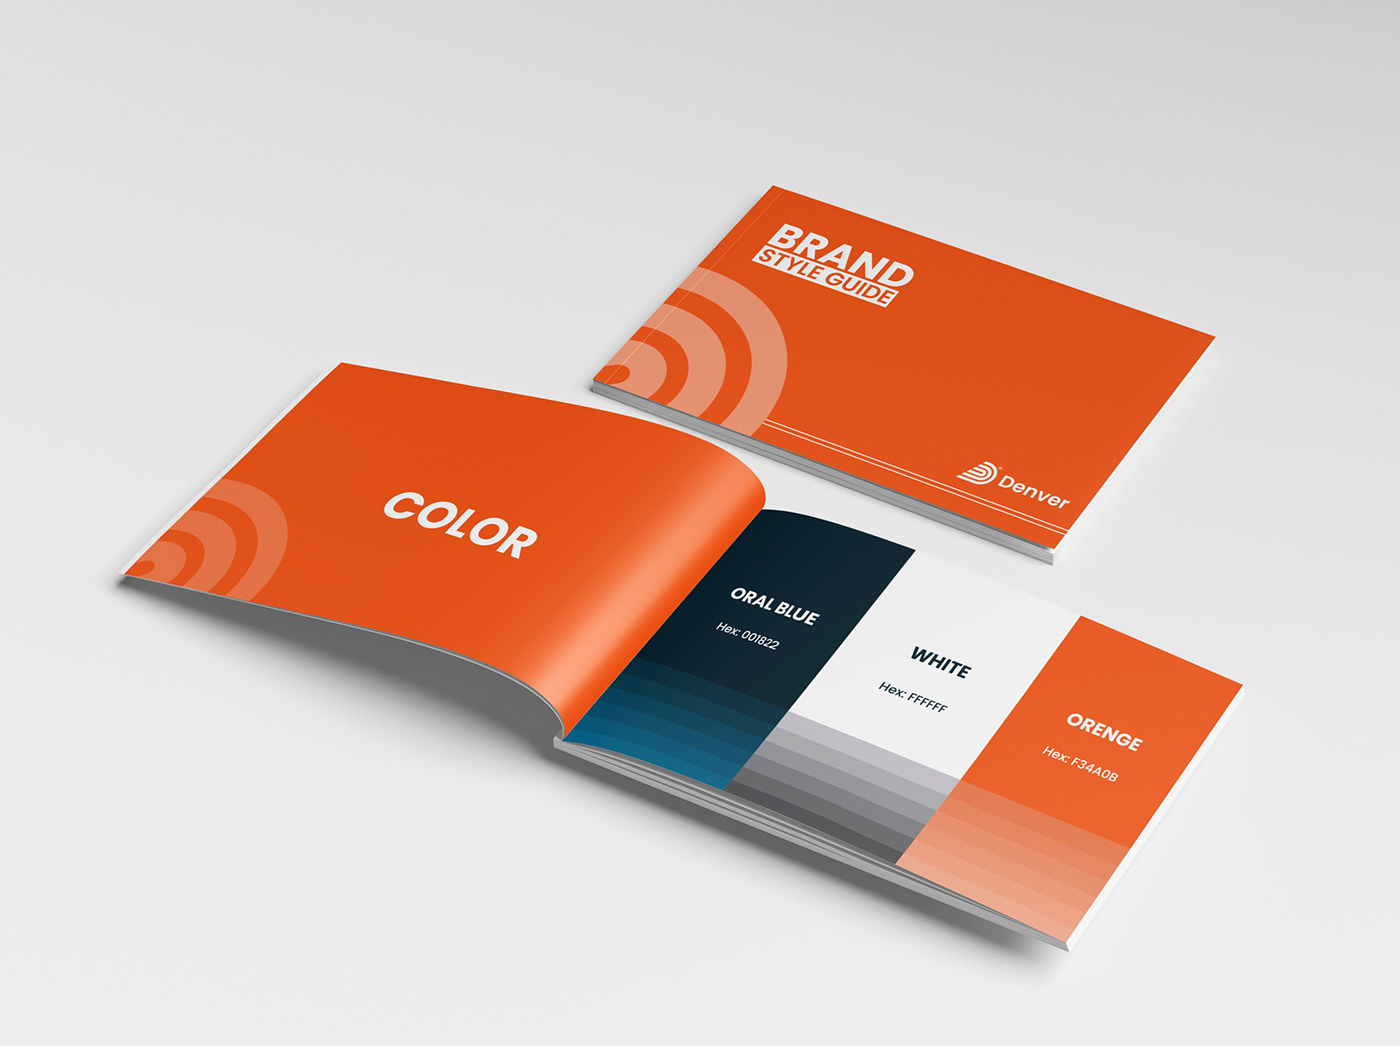 brand manual brand guidelines brand style guide brand book Style Guide